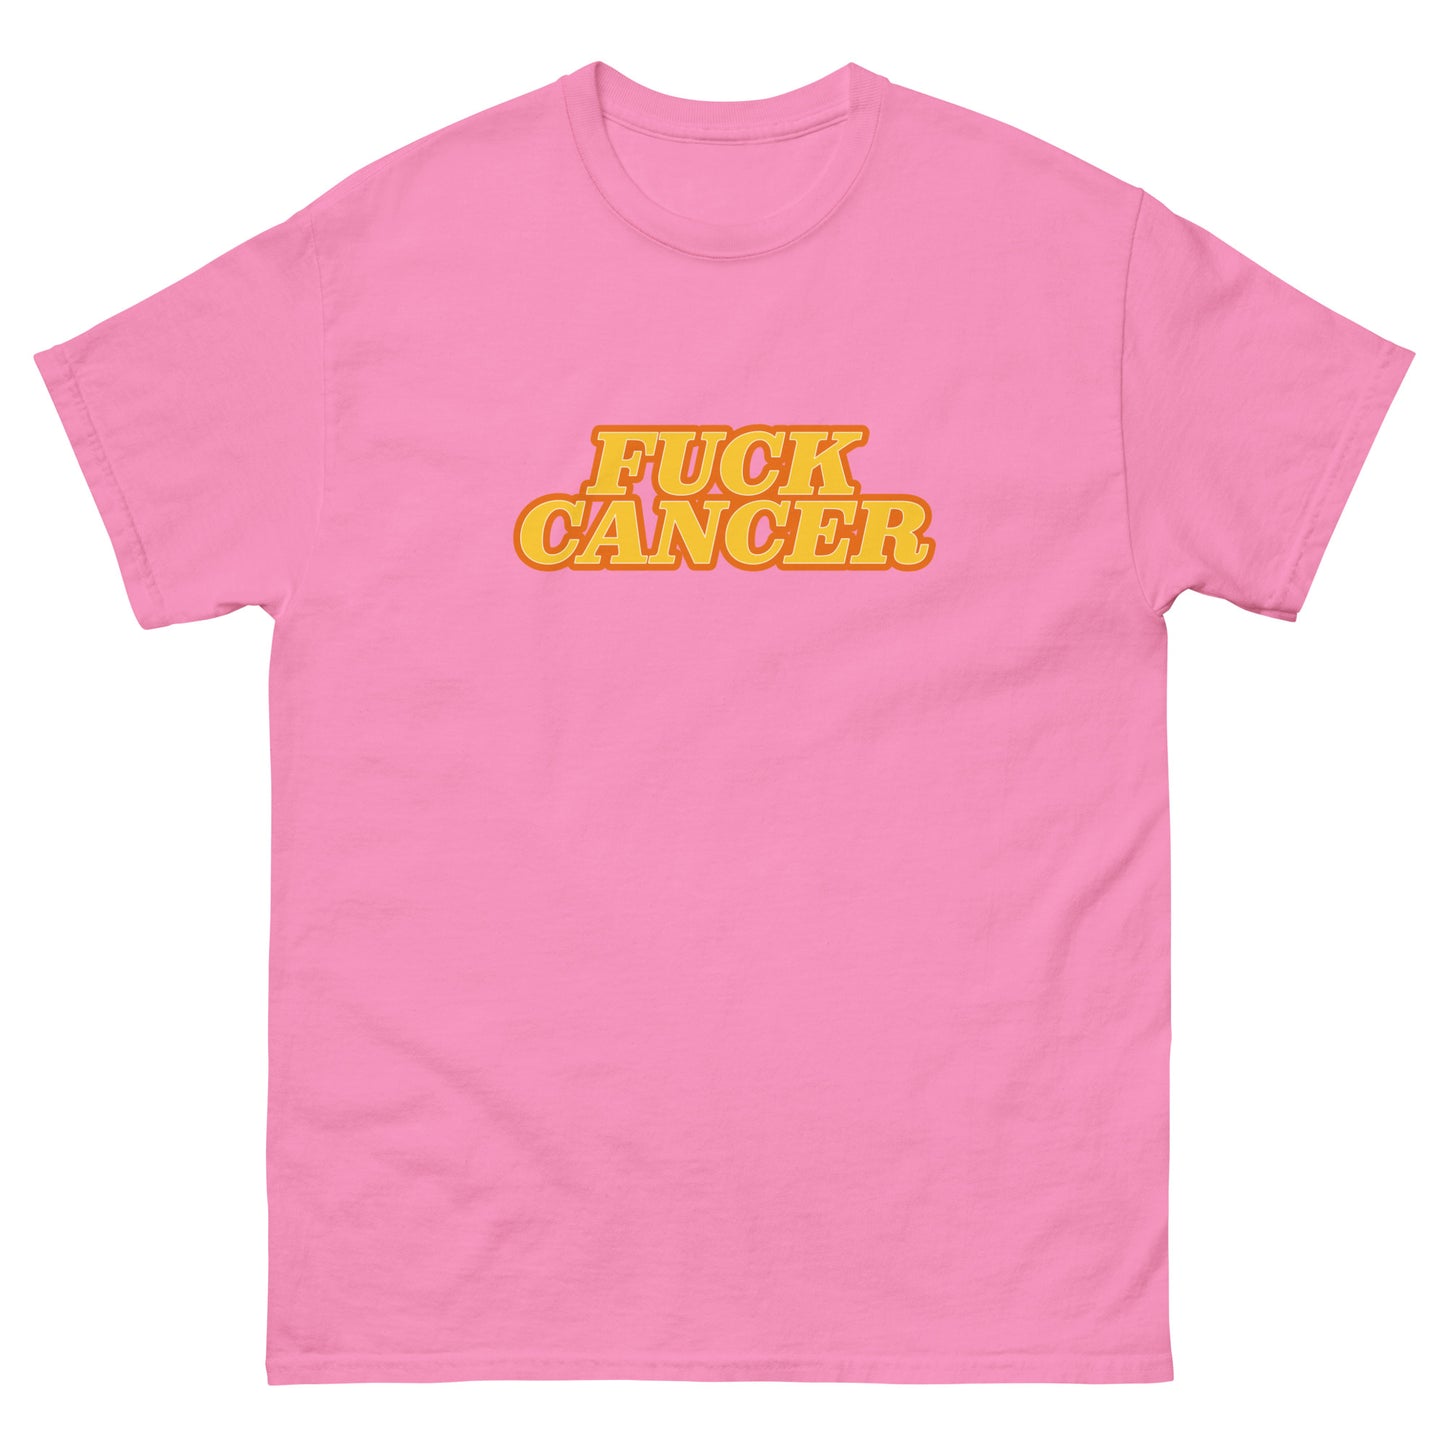 FUCK CANCER graphic